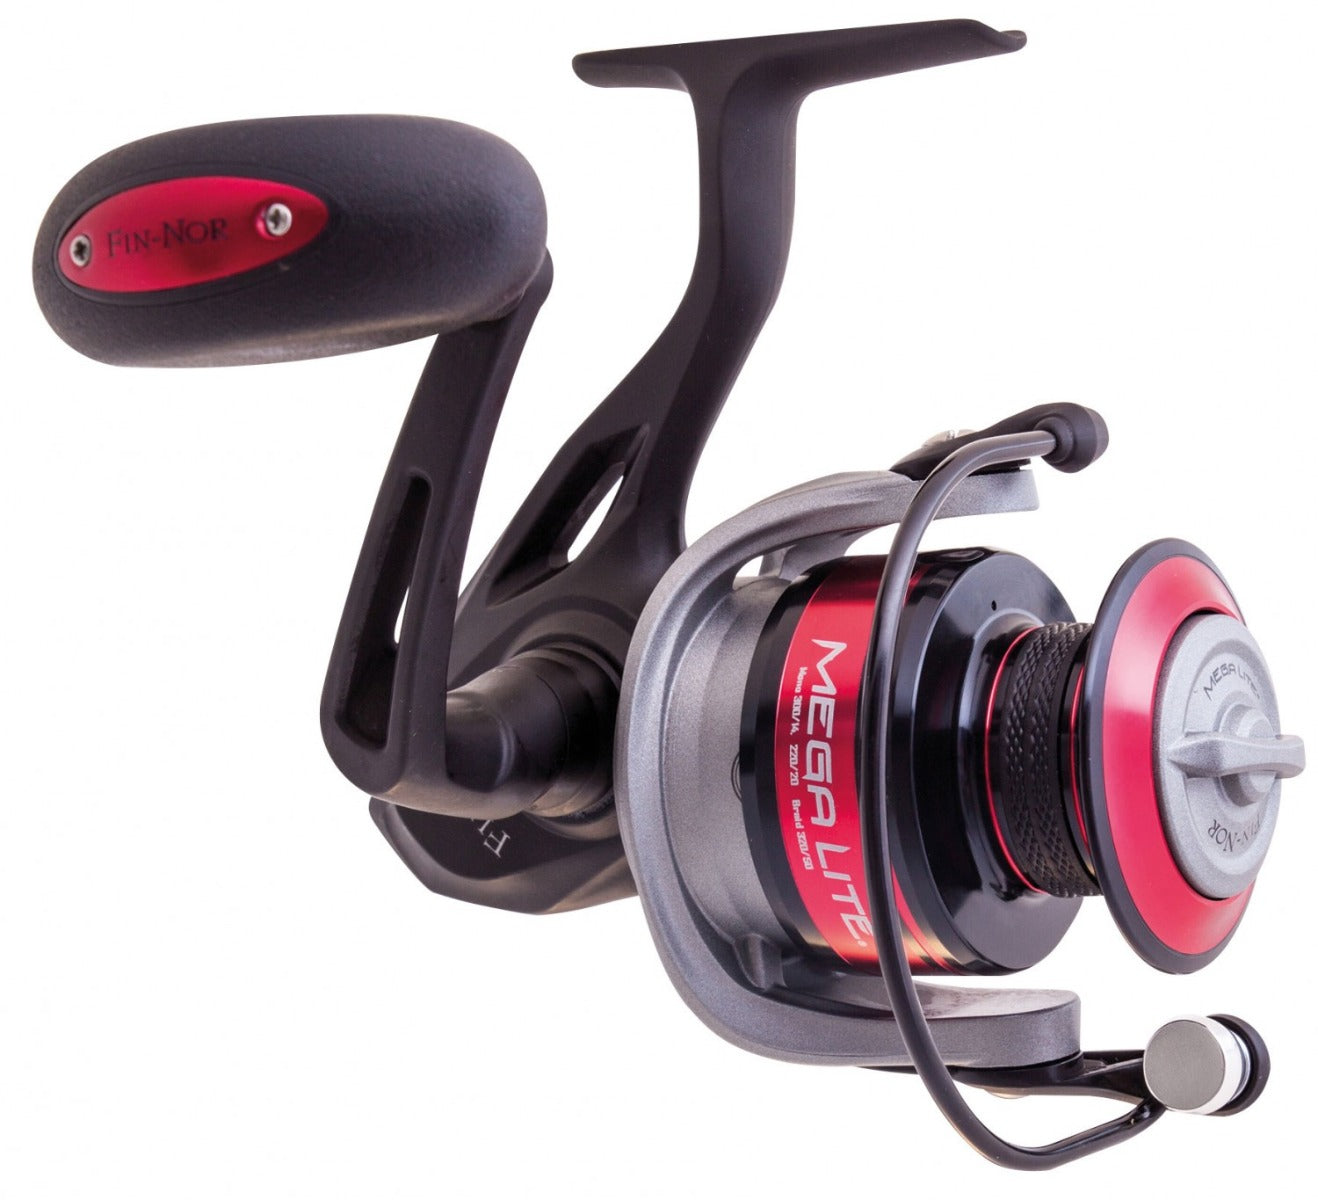 Fishing Reels For Sale - Shop for Spin, Overhead, Baitcast & more Page 4